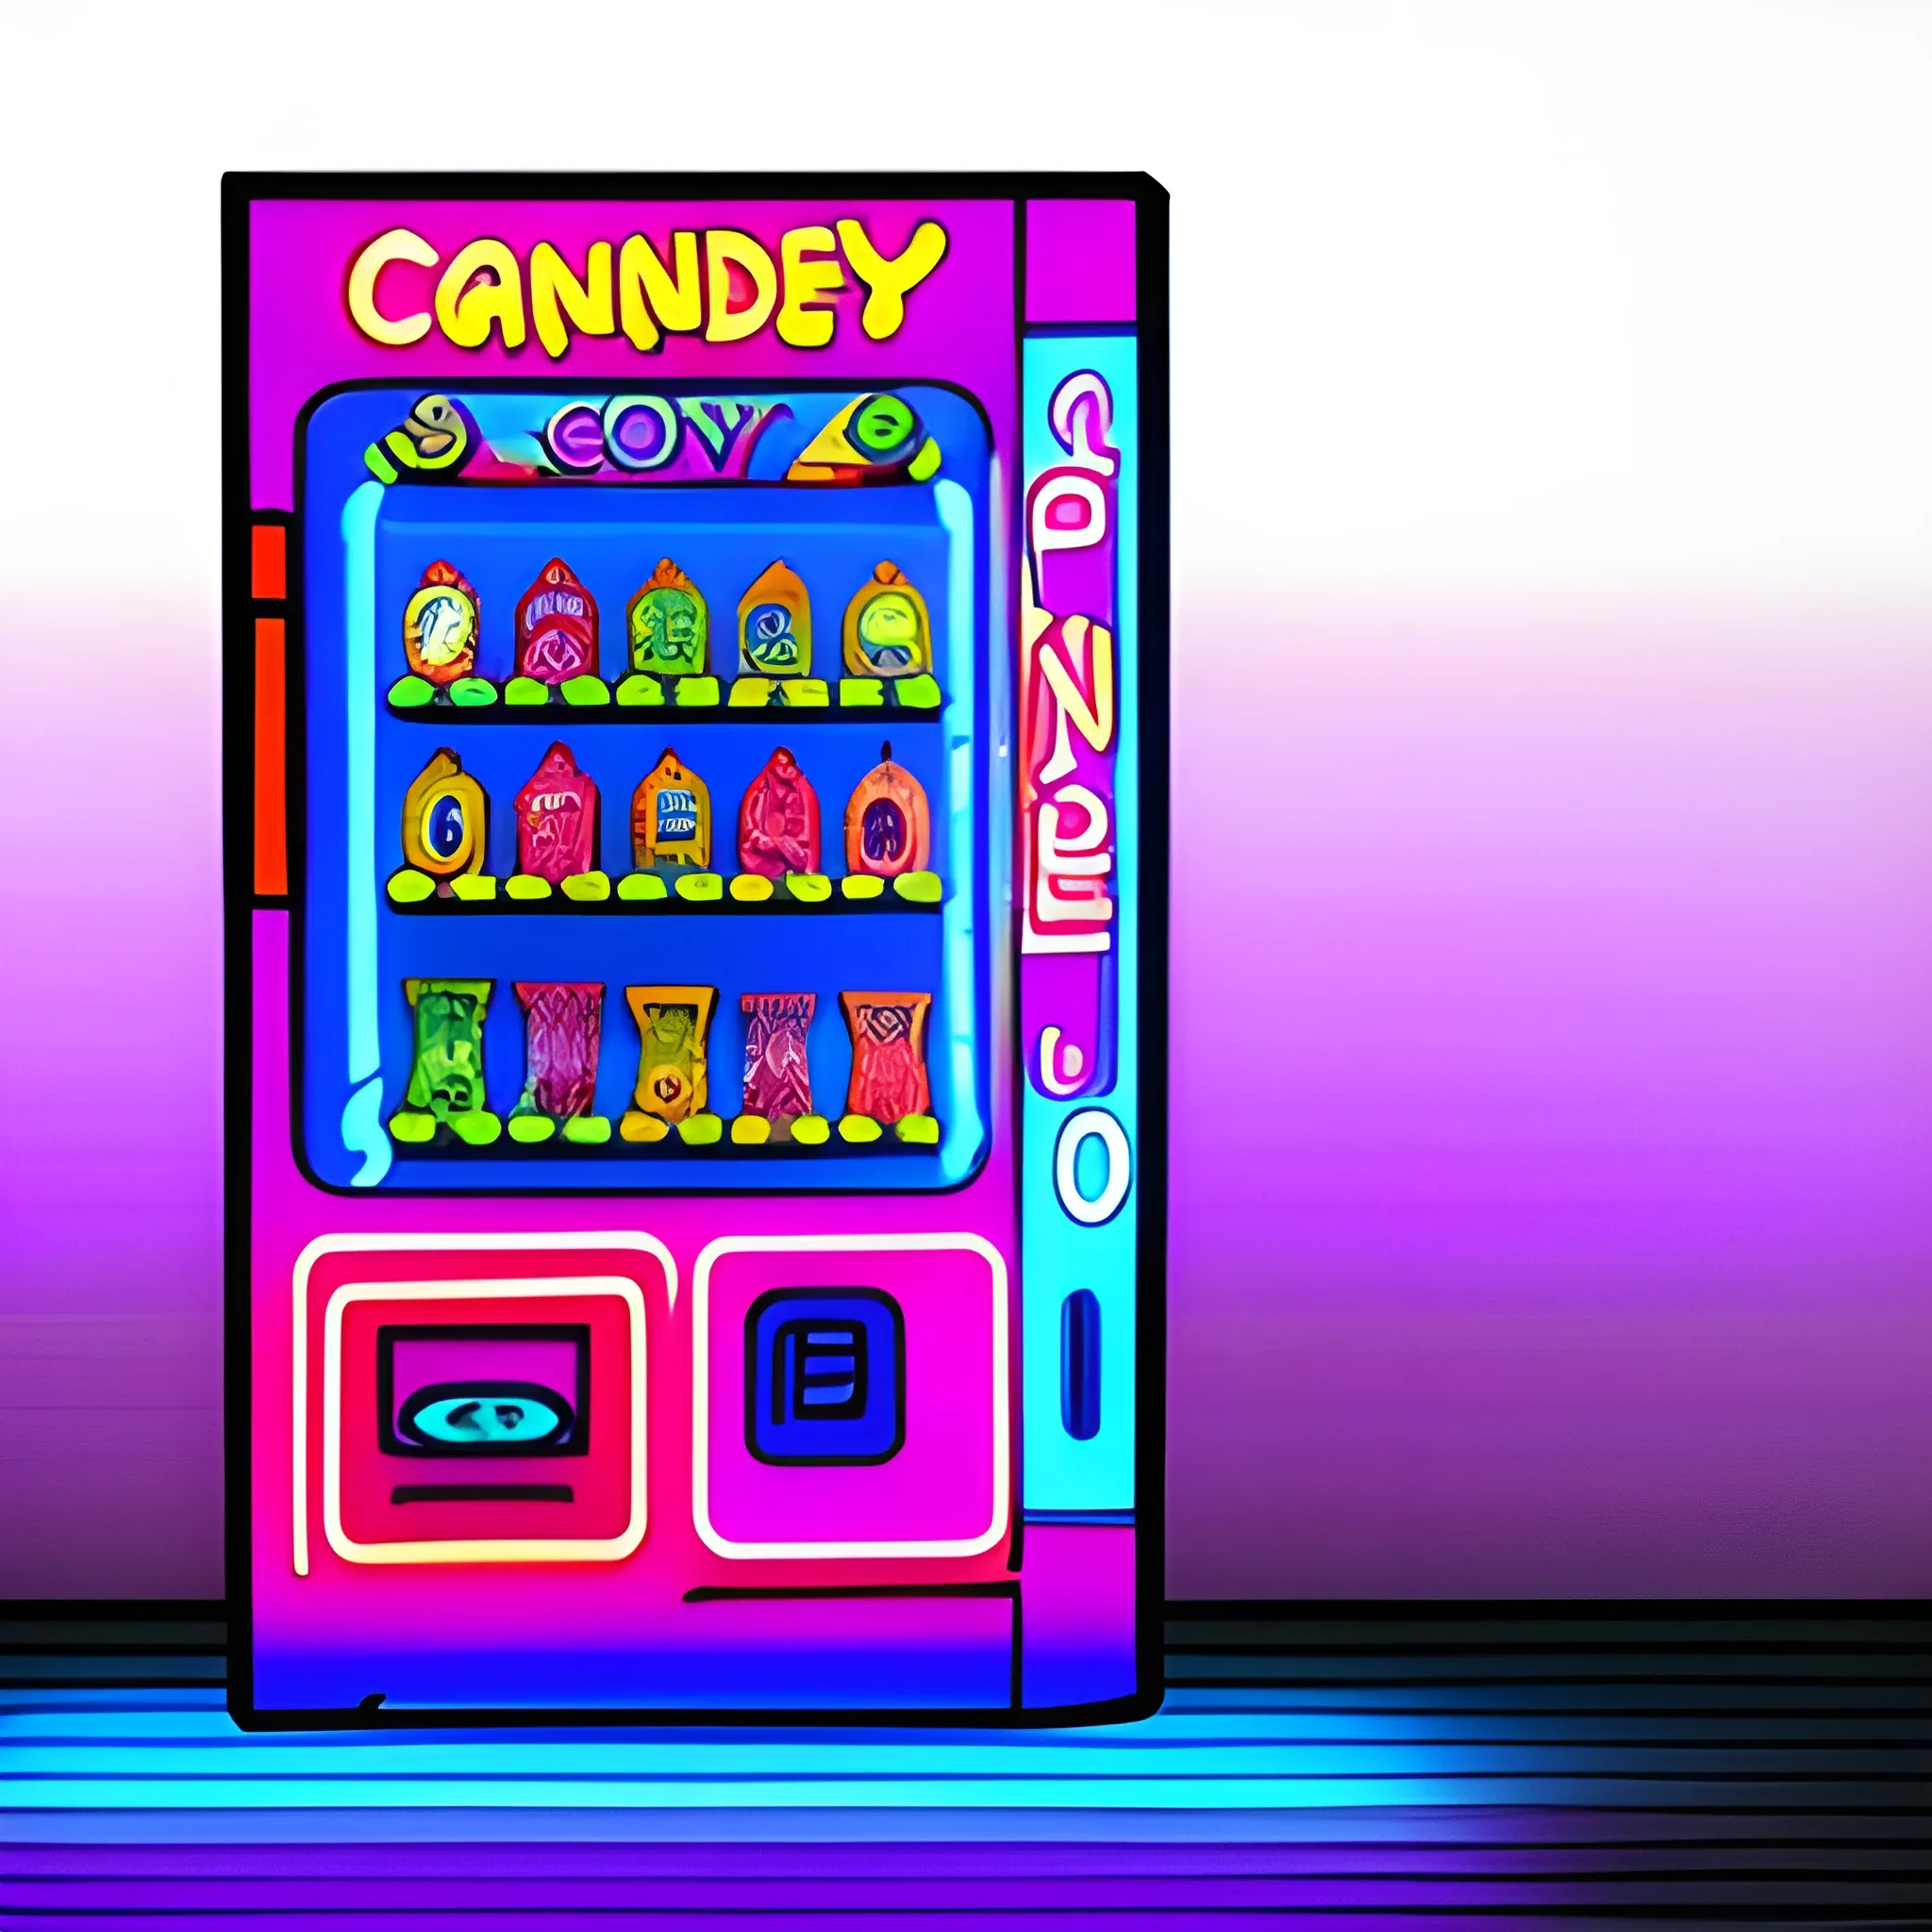 candy, beverage, toy vending machine in digital drawing style with neon lights, with a close-up view